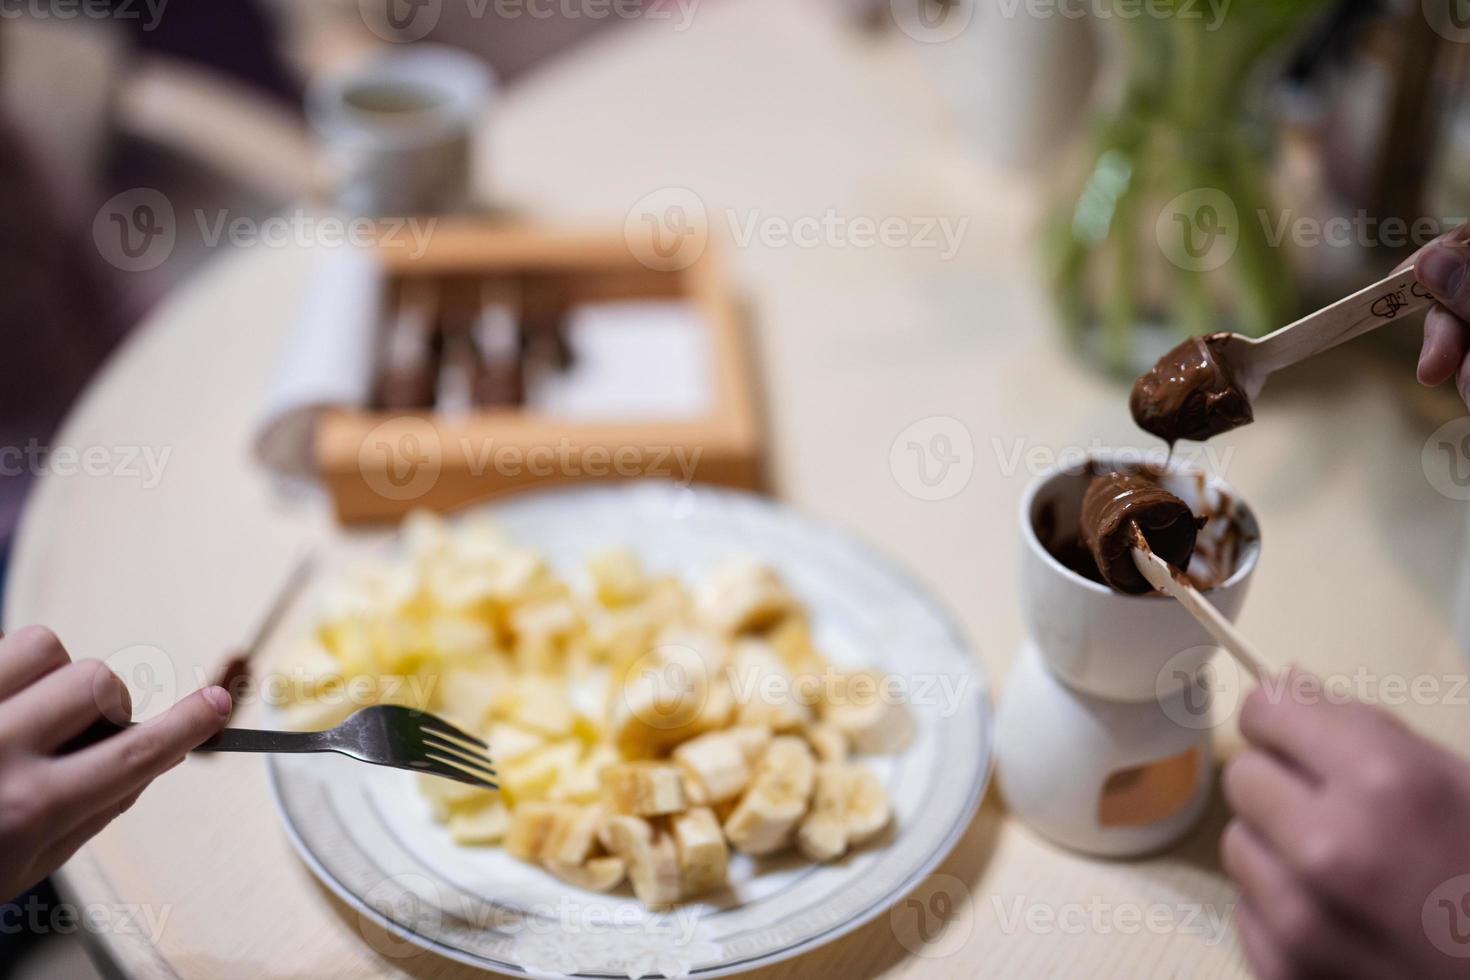 Children eat fruits and desserts, drink tea at home in the evening kitchen. Close up hand with chocolate on a stick for melting. photo